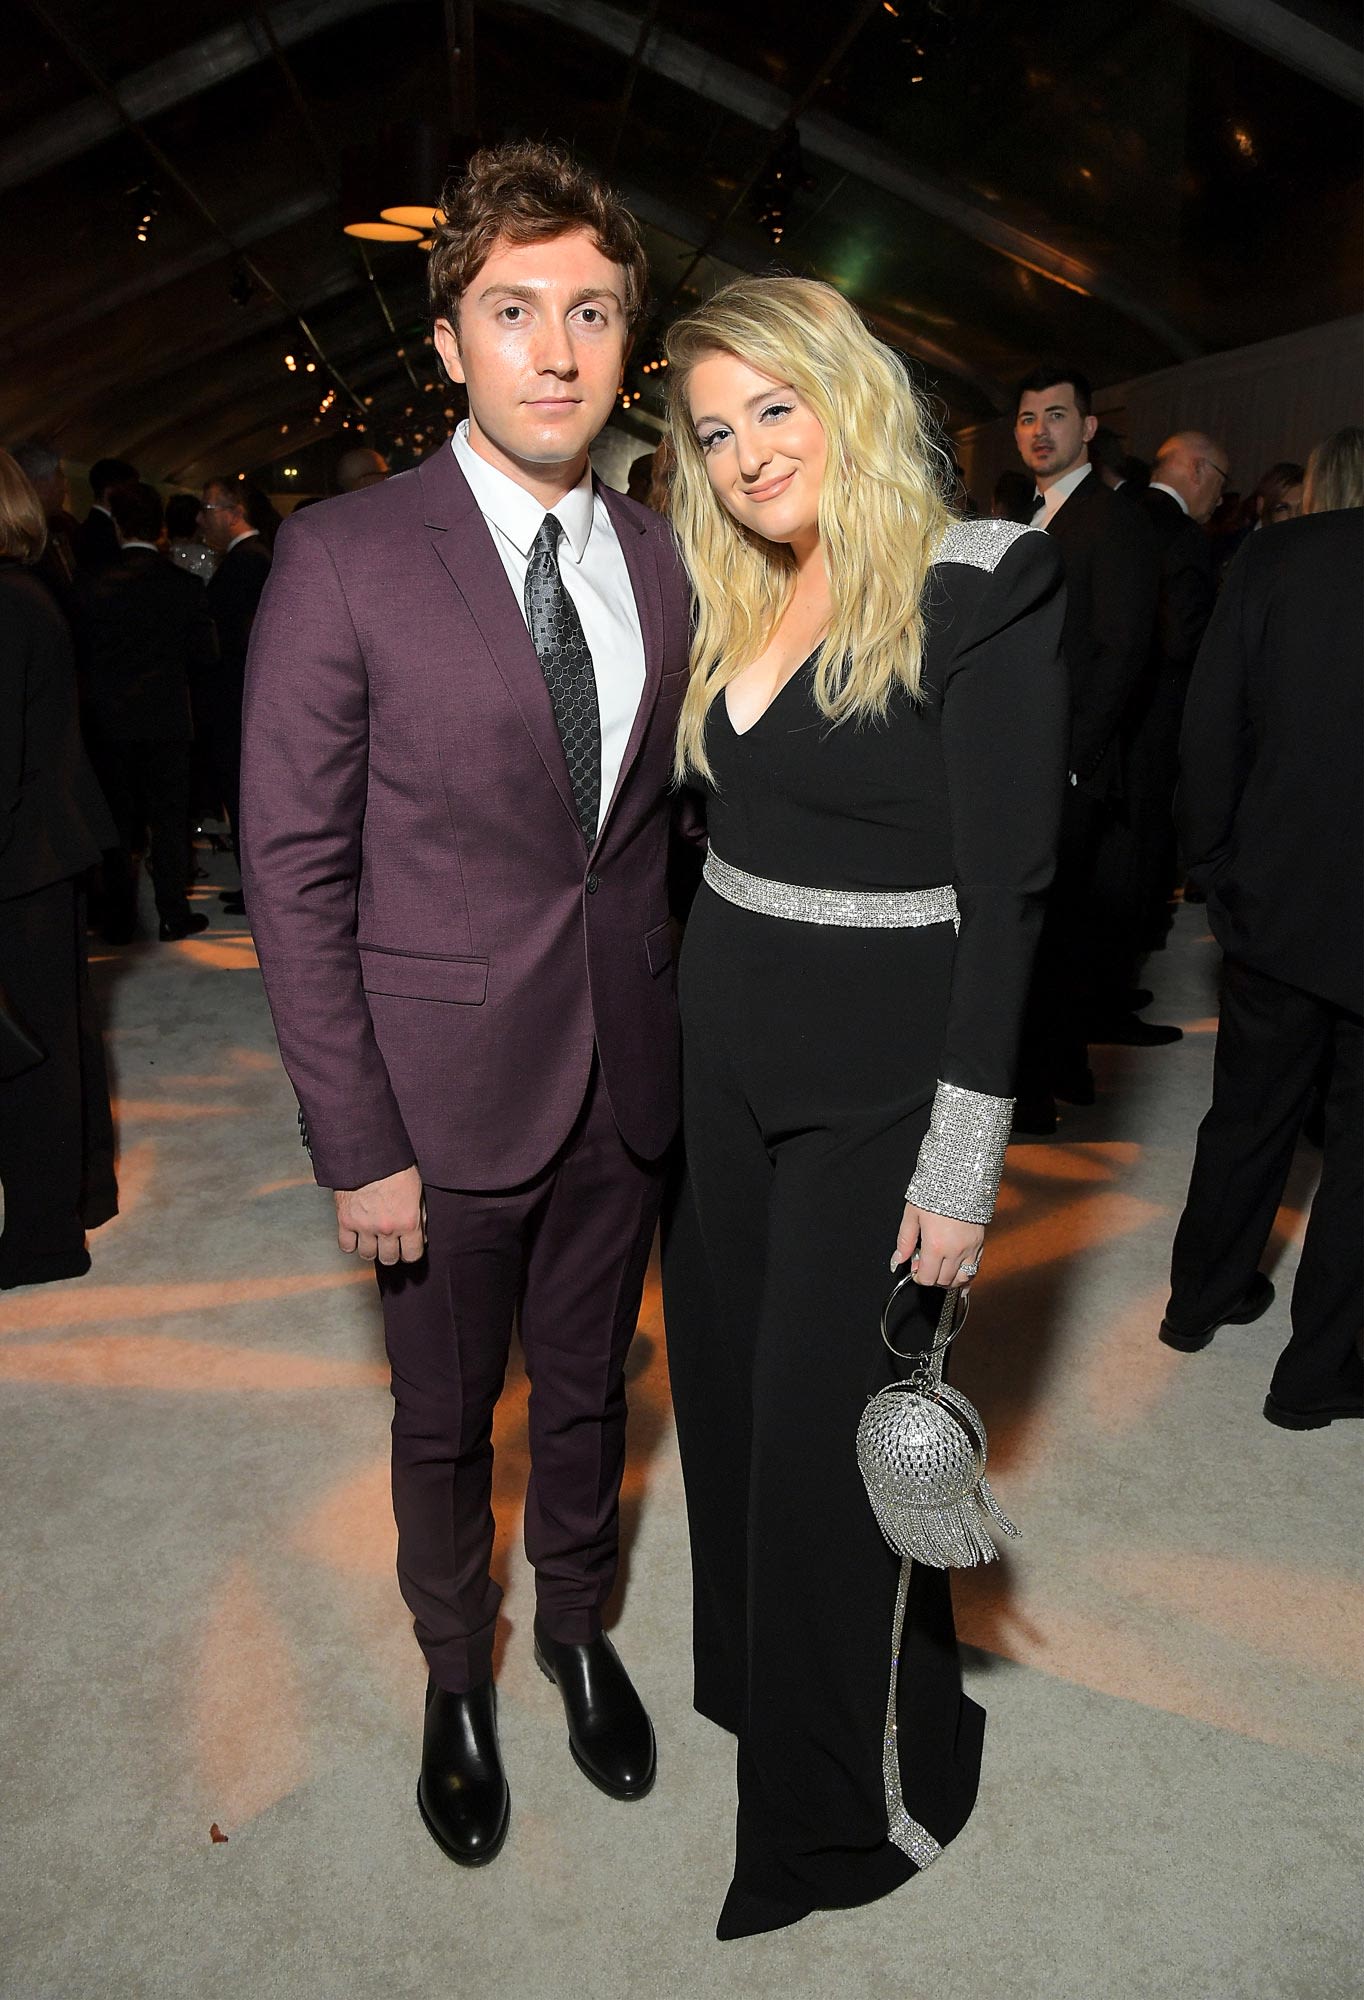 Meghan Trainor Had ‘Safety Net’ Marriage Pacts Before Meeting Husband Daryl Sabara